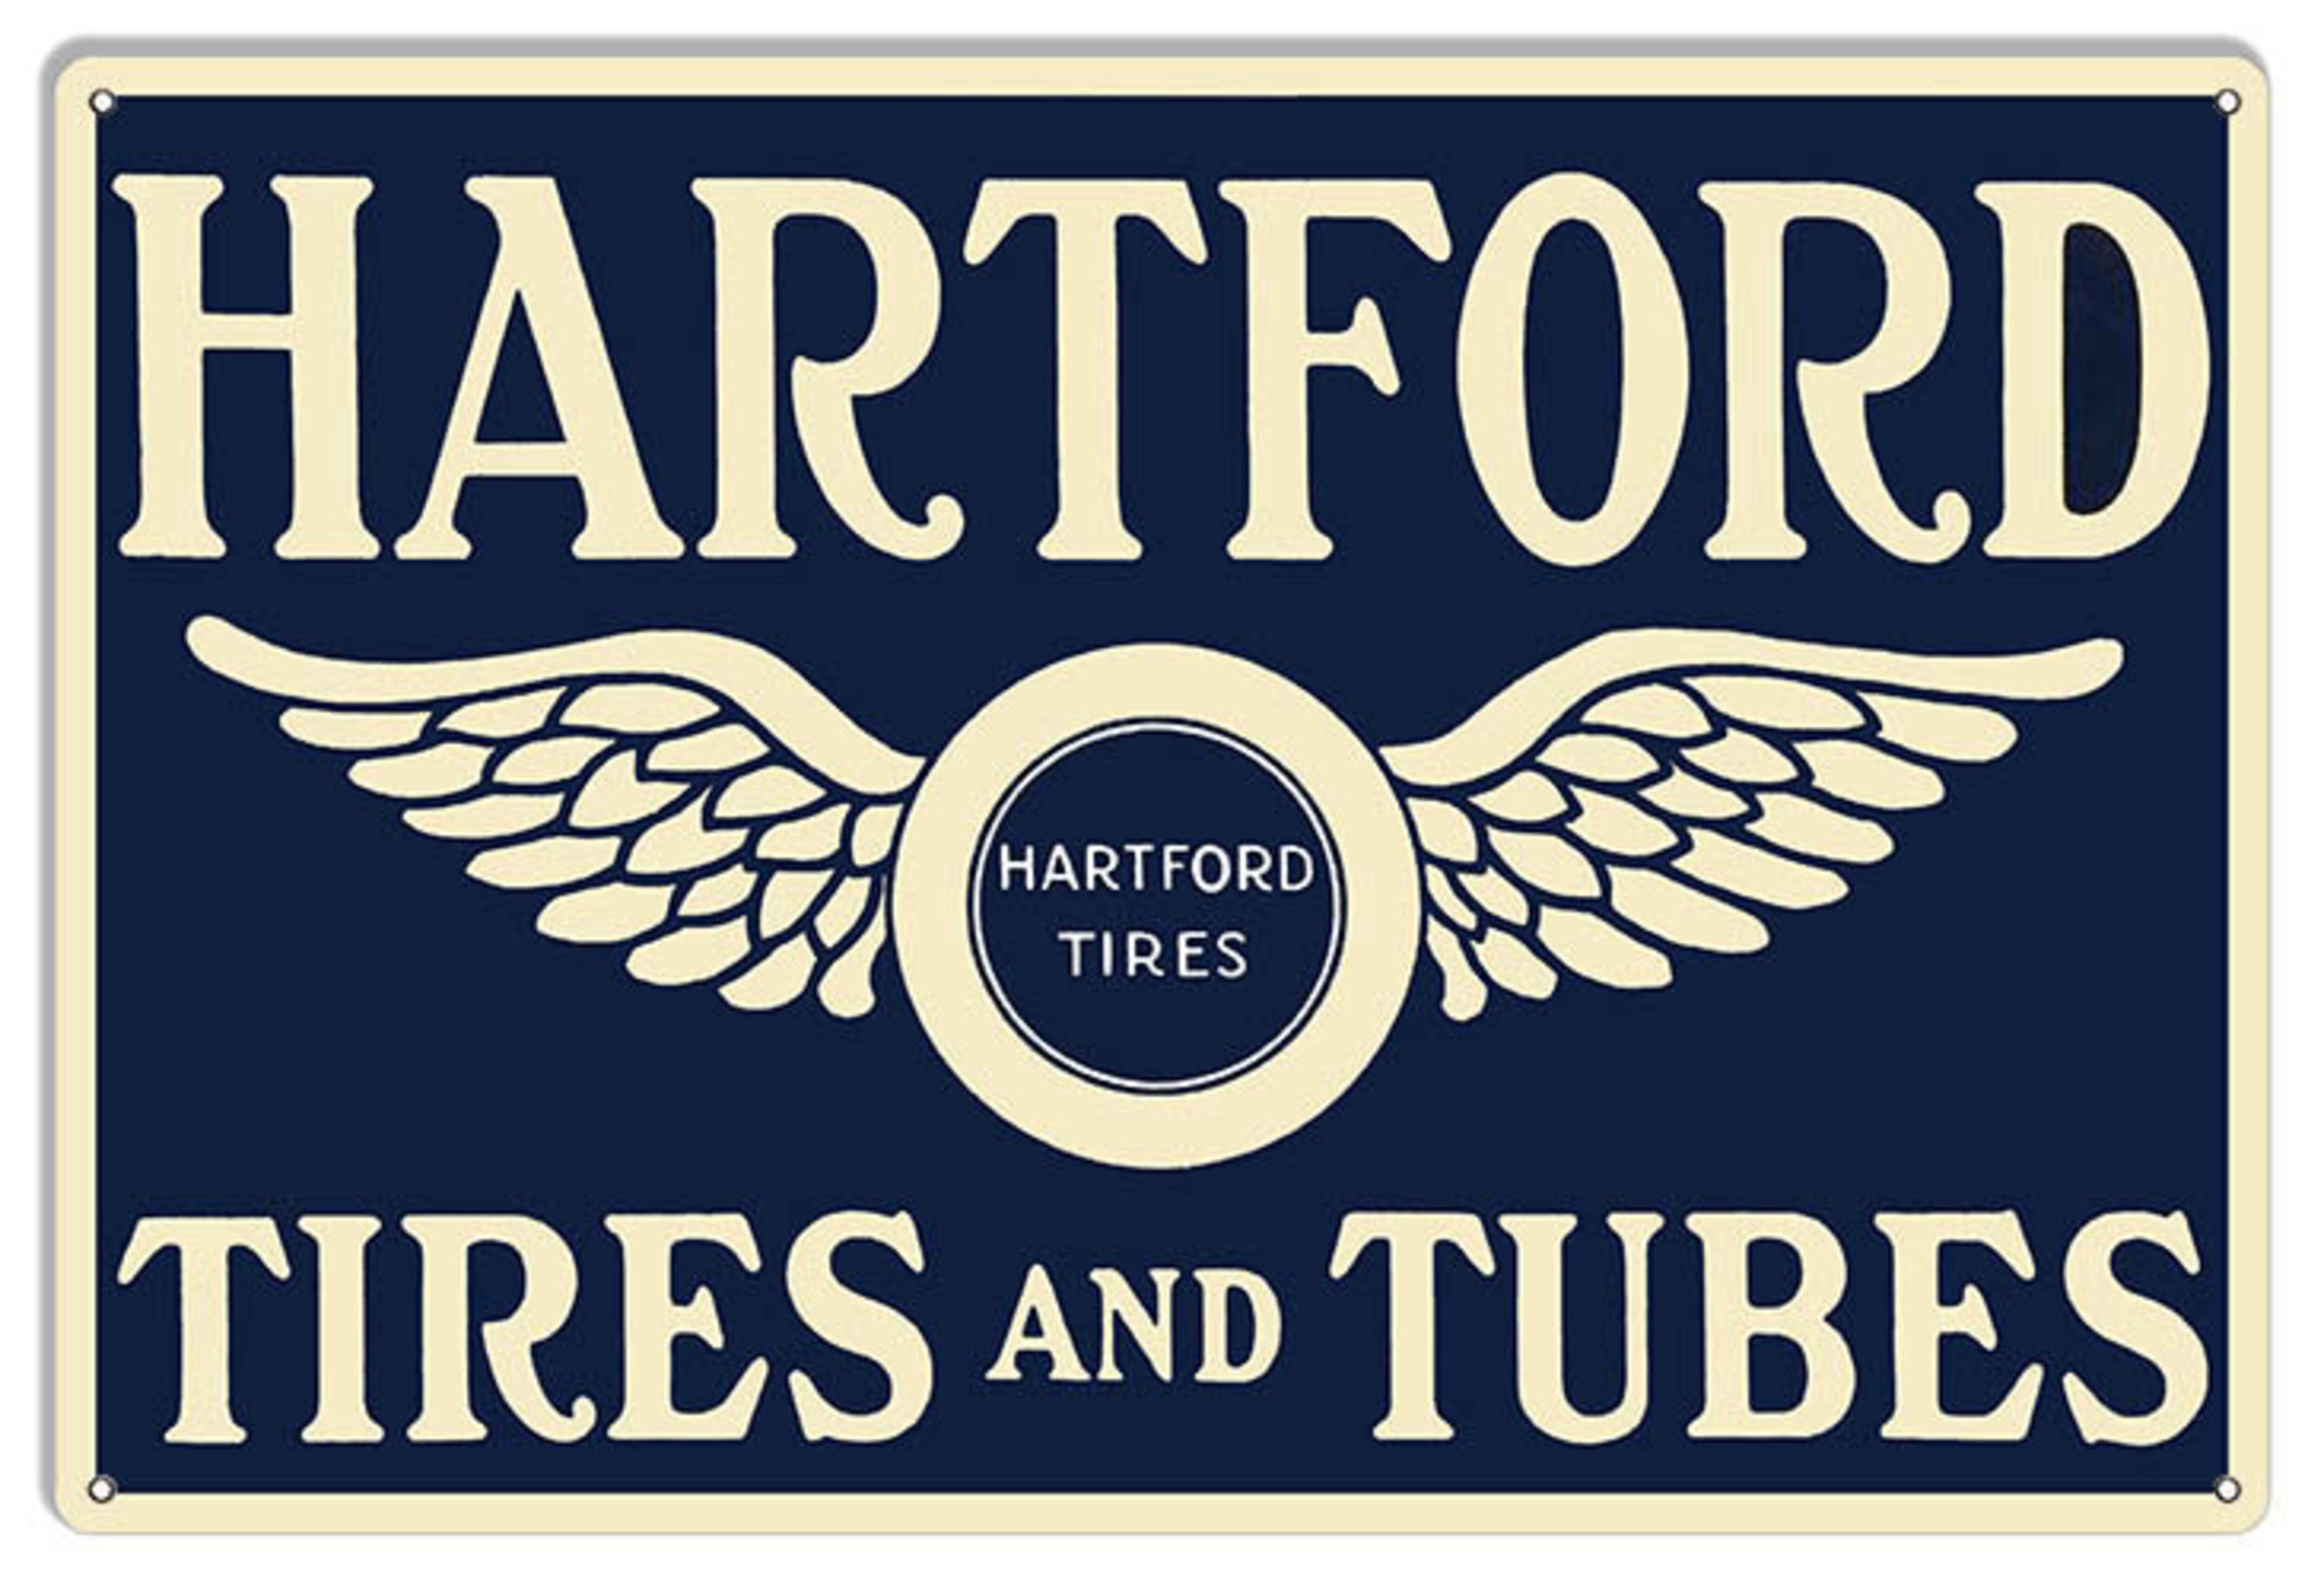 Hartford Tires And Tubes Metal Sign 3 Sizes Available Aged OR New Style Vintage Style Retro Garage Art RG